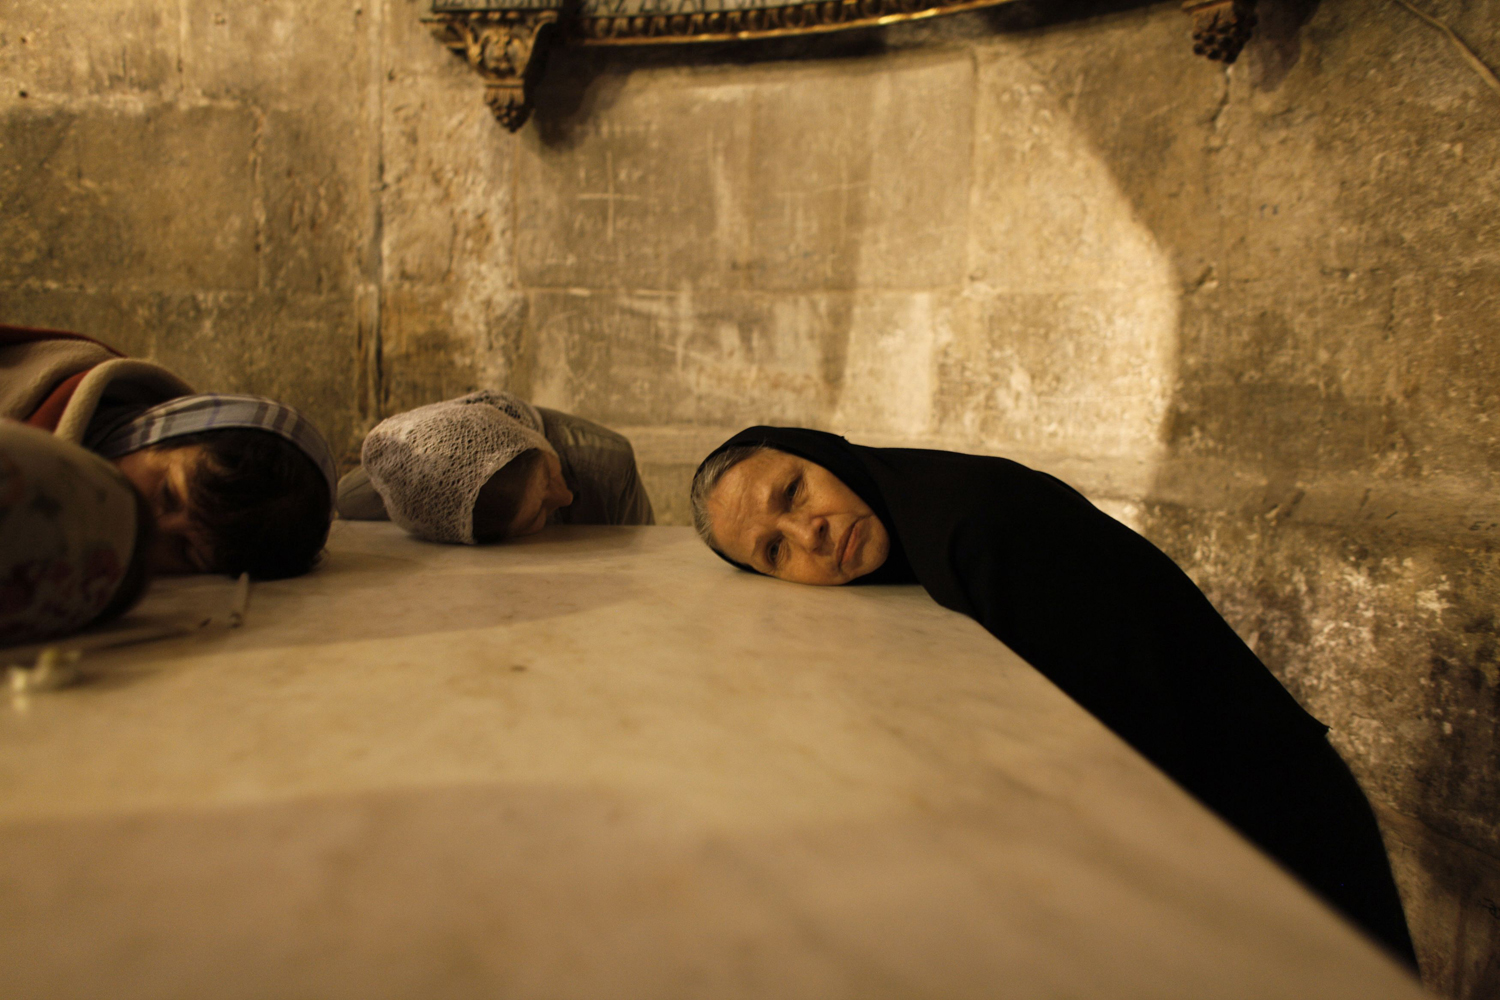 Image: Nov. 11, 2012. Christian worshippers pray in the Church of the Holy Sepulchre in Jerusalem's Old City.